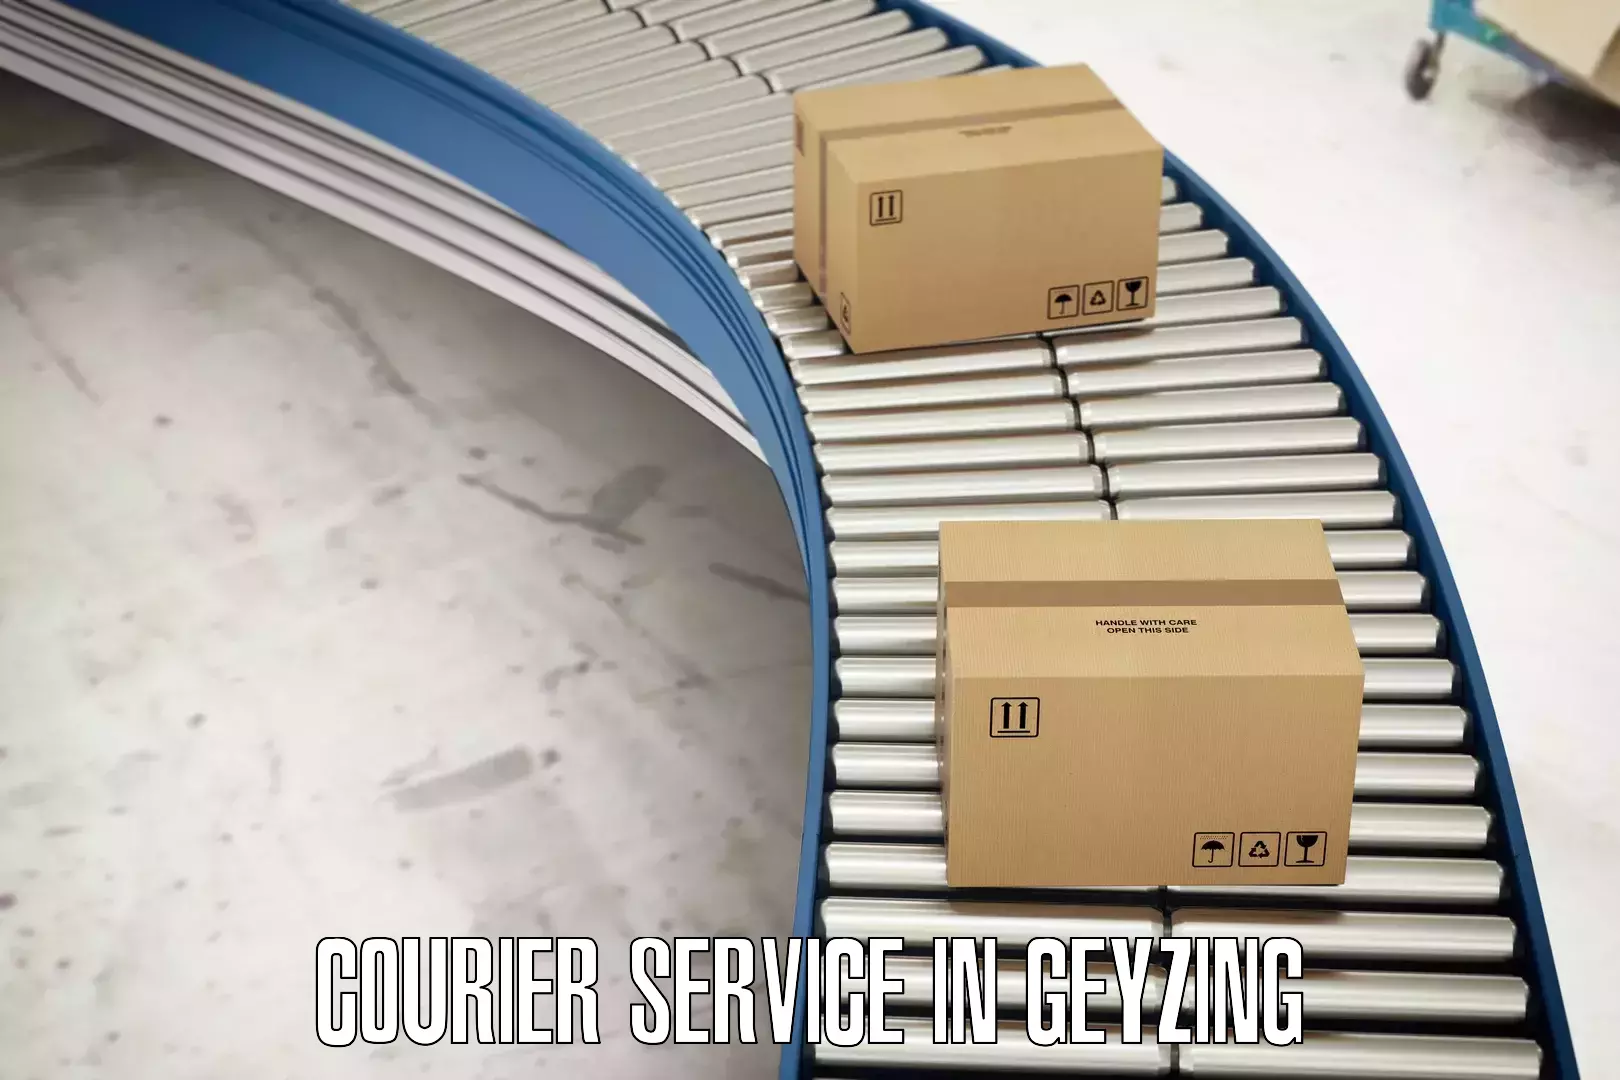 24/7 shipping services in Geyzing